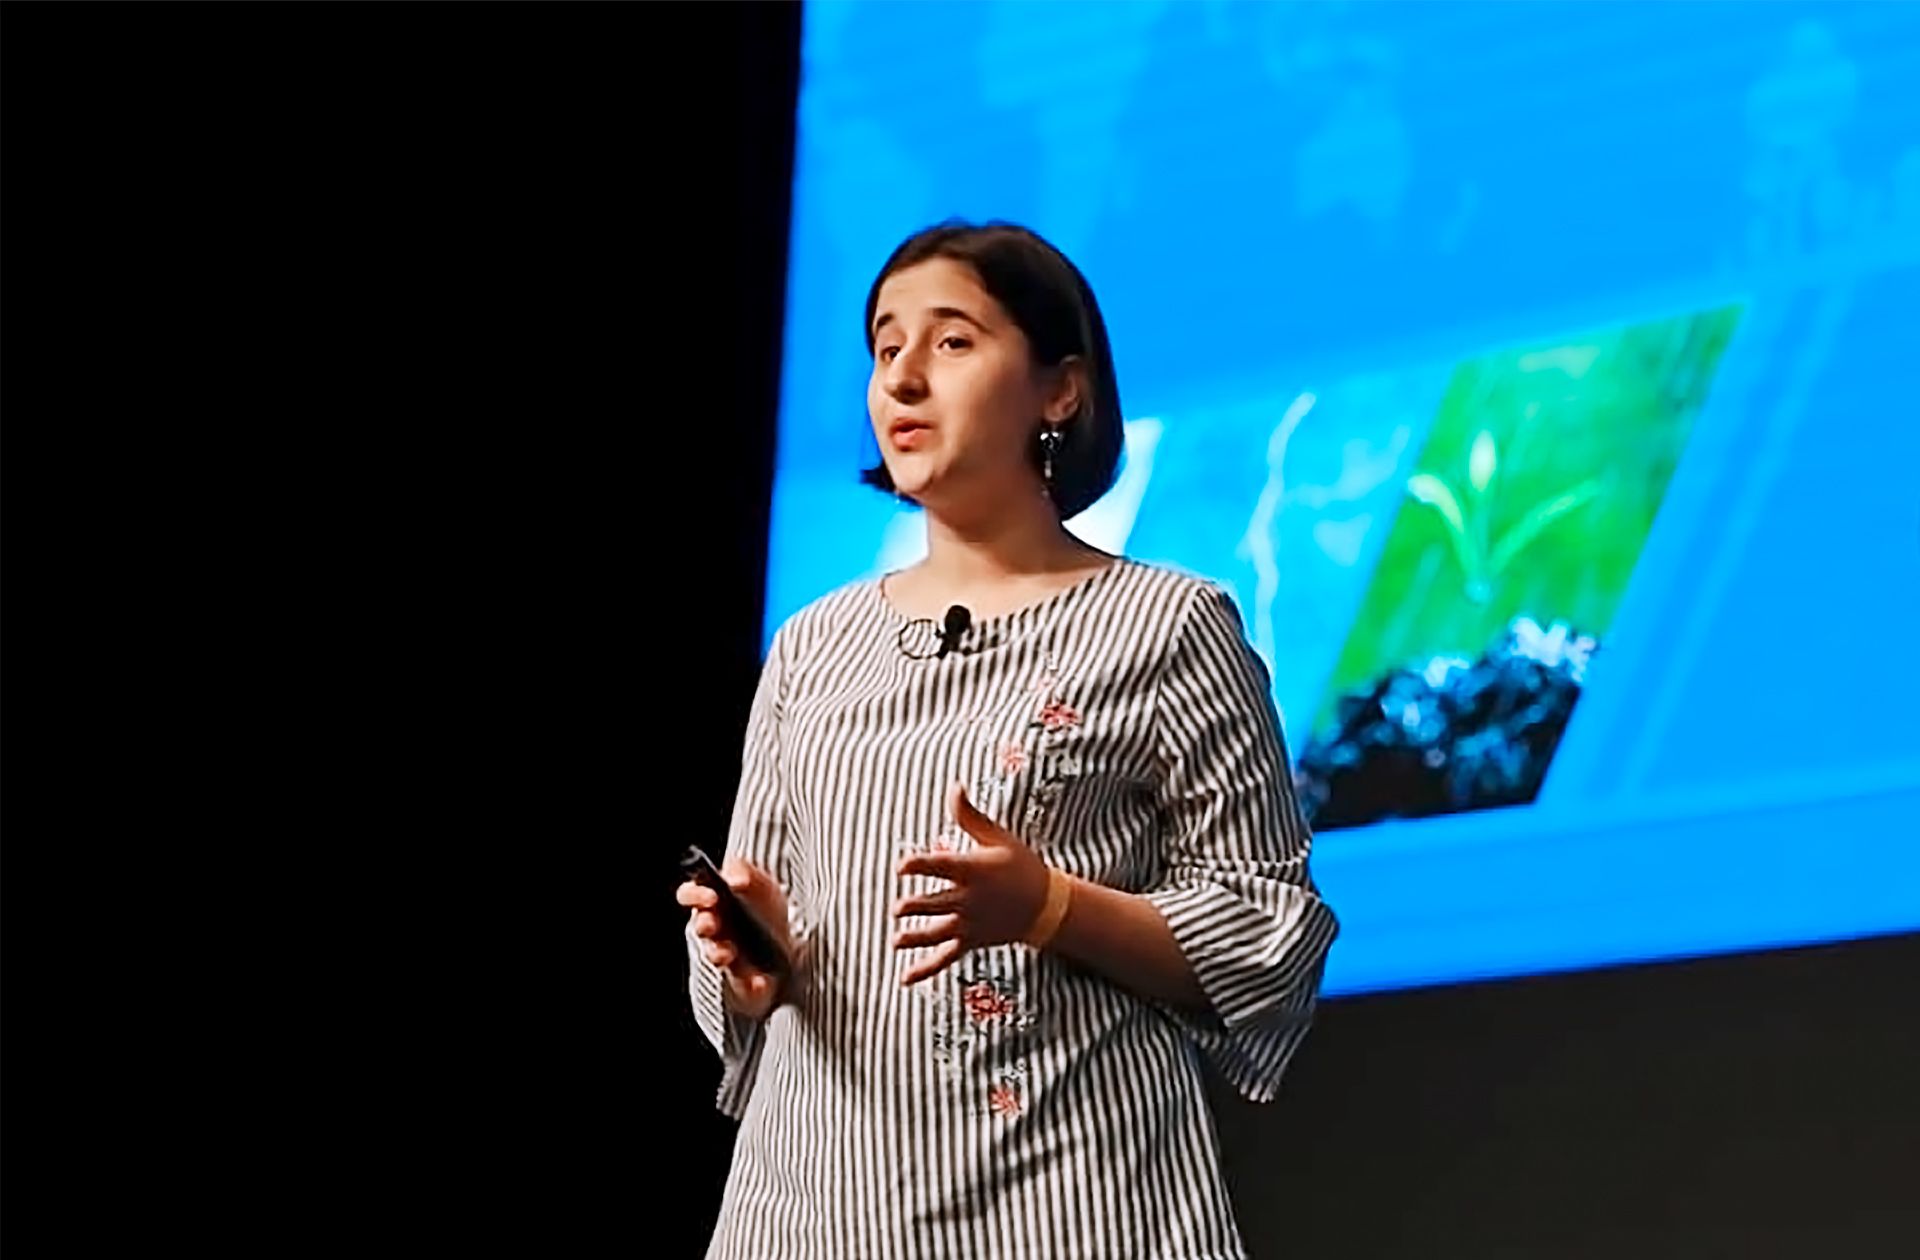 Reyhan Jamalova (18), founder of Rainergy, developed a device that generates energy from rainwater when she was just 14 years old. Her device collects rainwater and drives a wheel that generates electricity. This relieves pressure on the local power grid and reduces CO2 emissions.